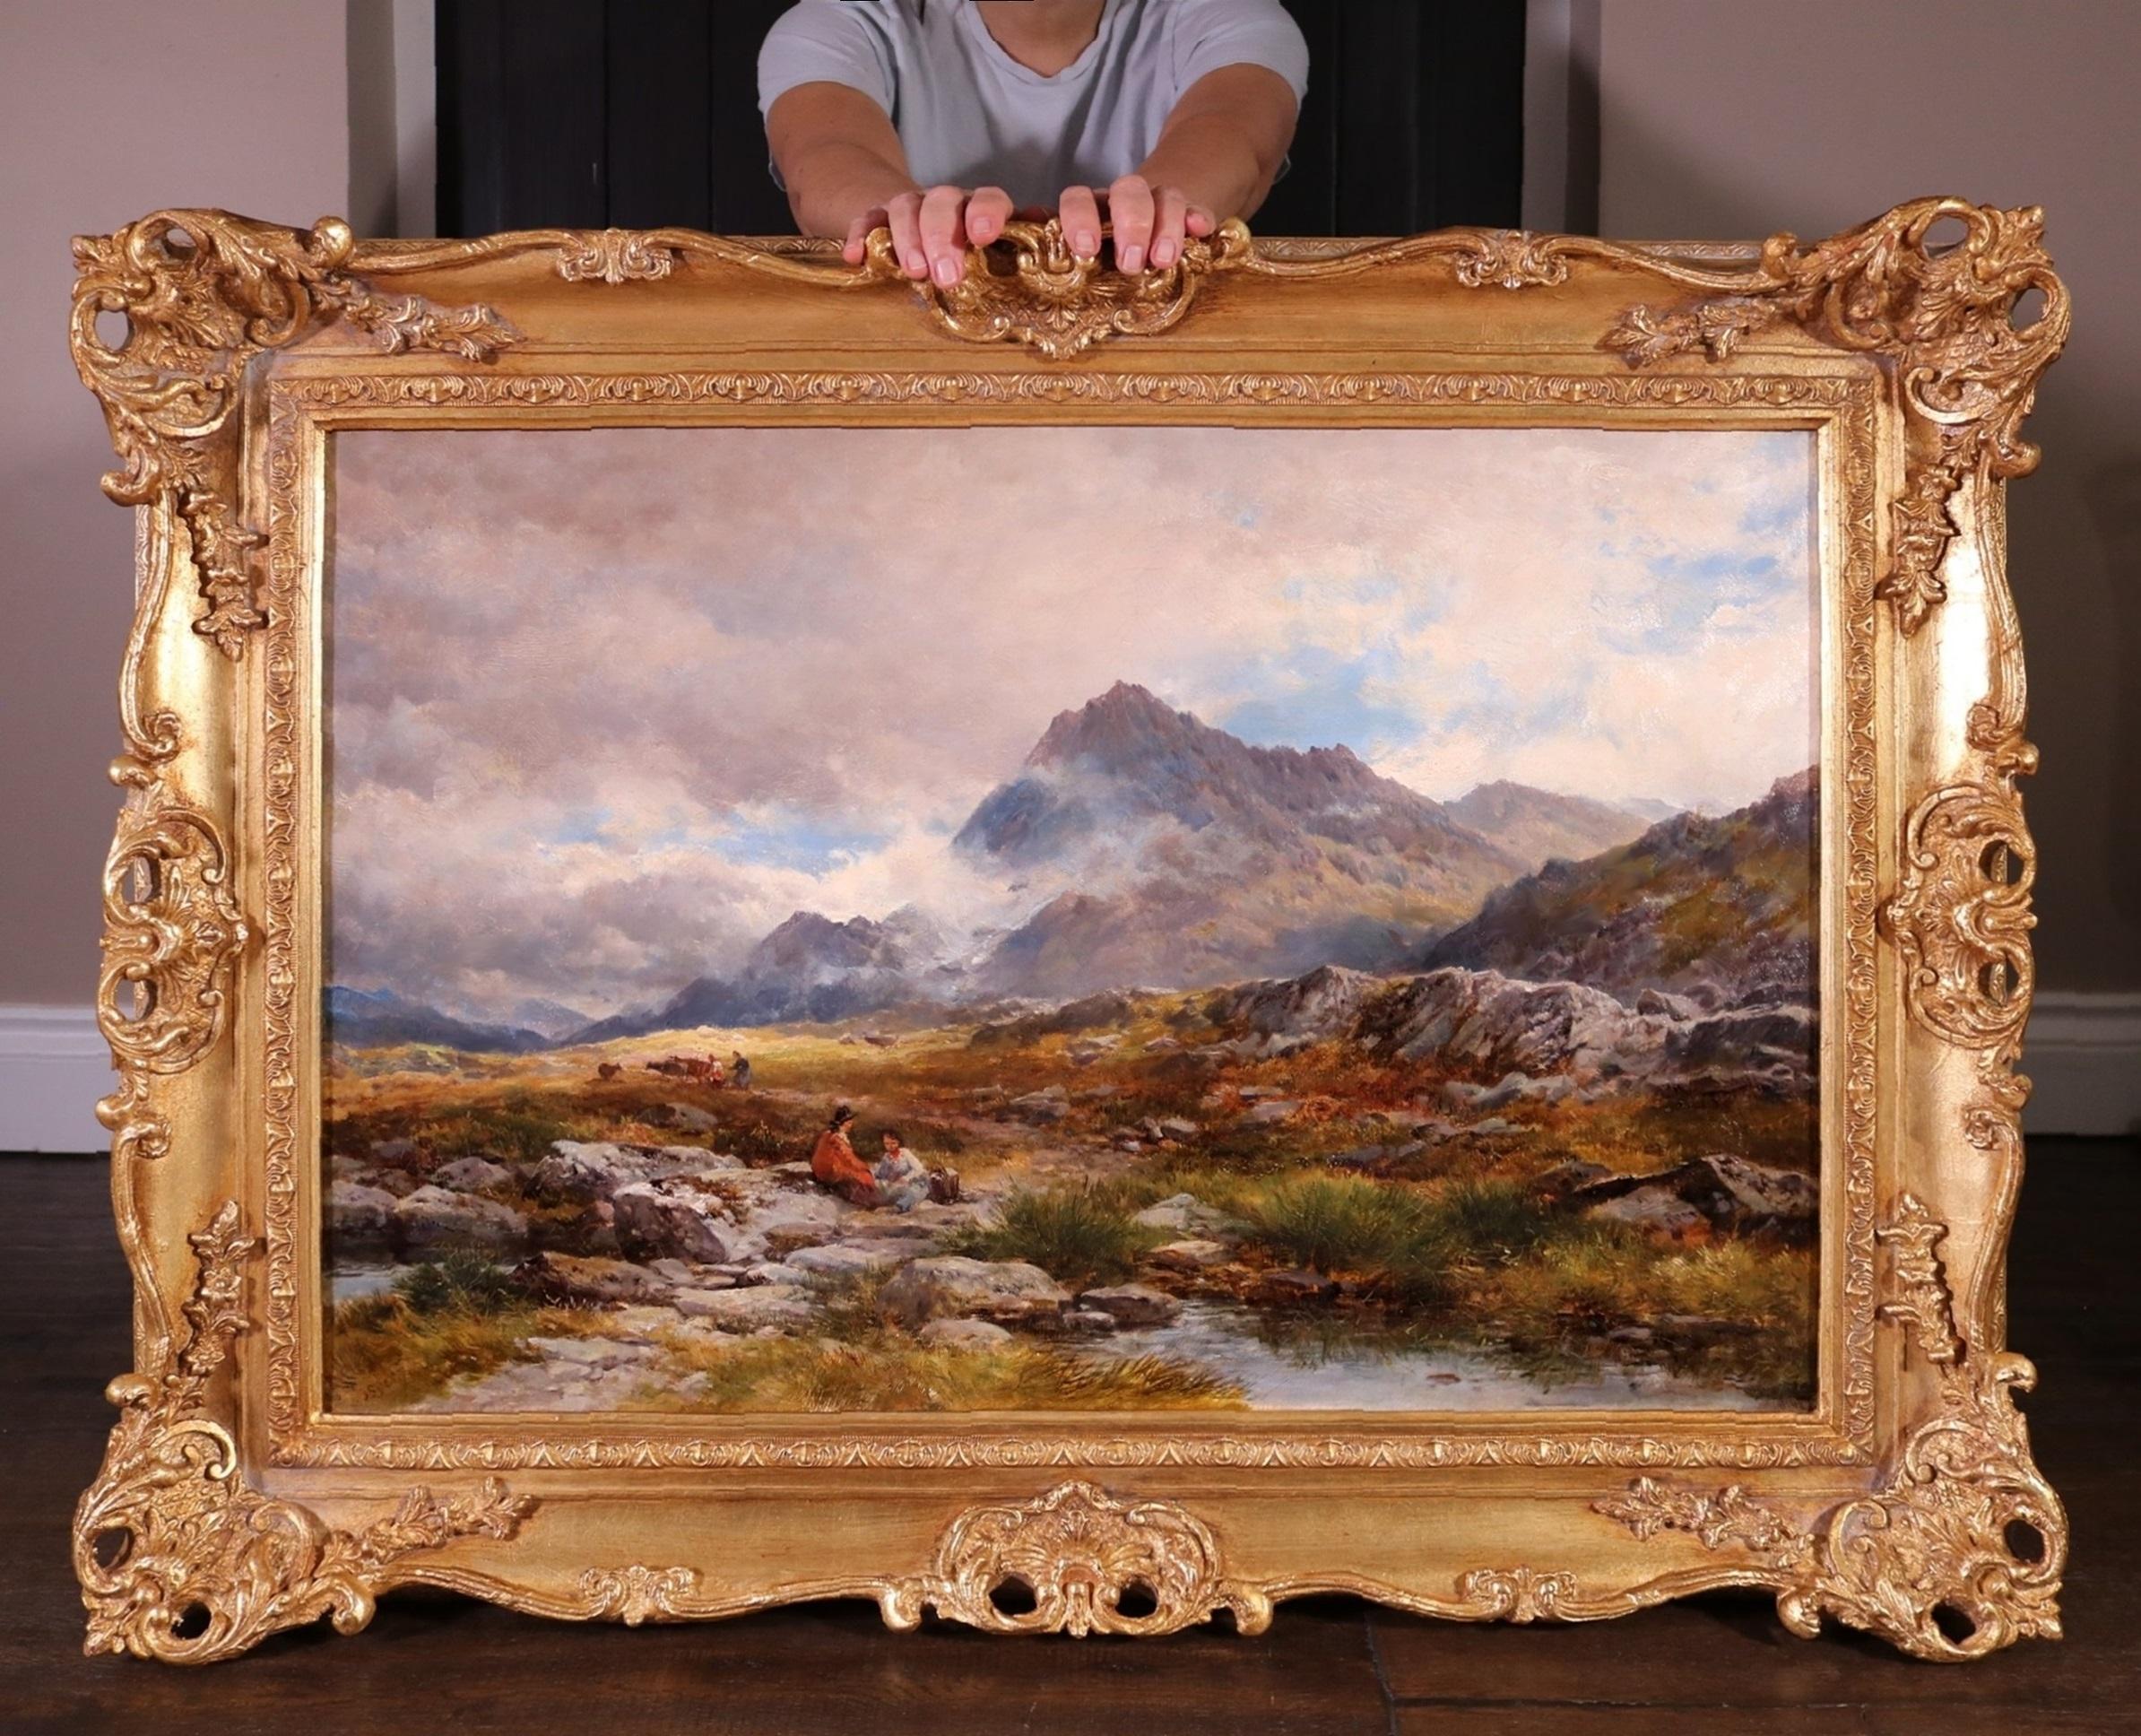 John Syer Landscape Painting - Before Glyder Fawr - Large 19th Century Welsh Mountain Landscape Oil Painting 